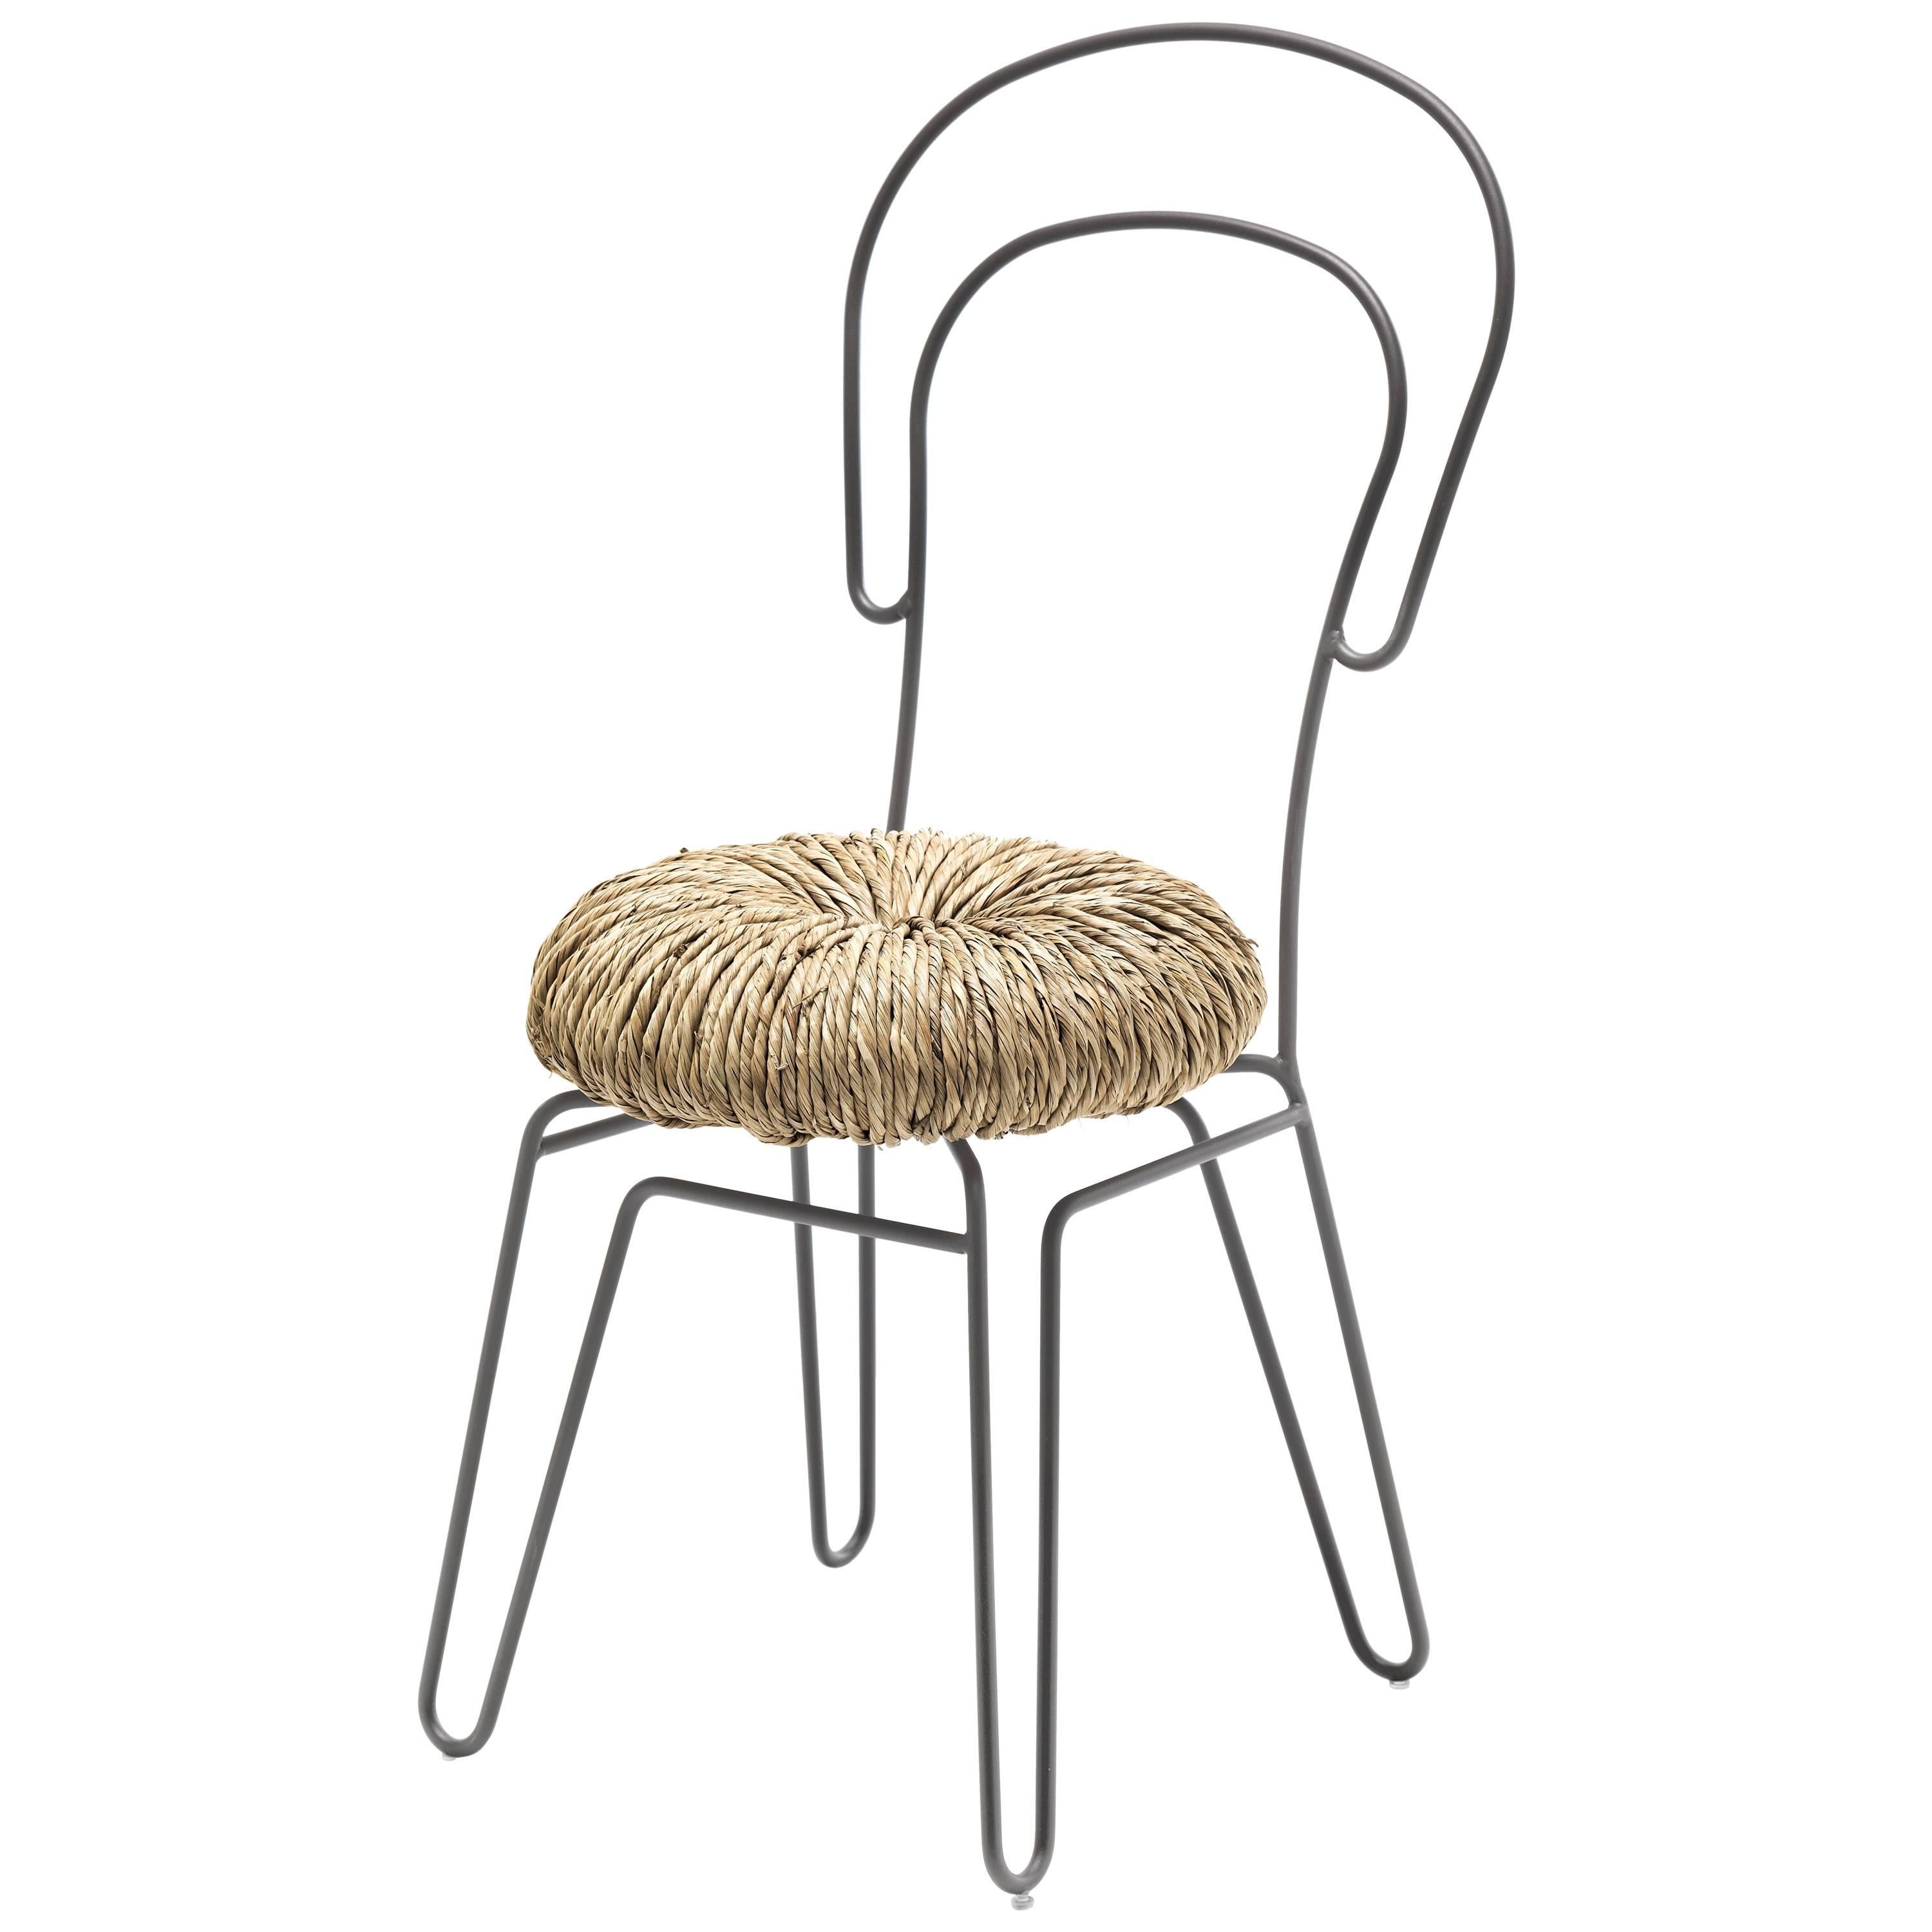 Donut Chair 'Set of Two' in Silver Finish by Alessandra Baldereschi & Mogg